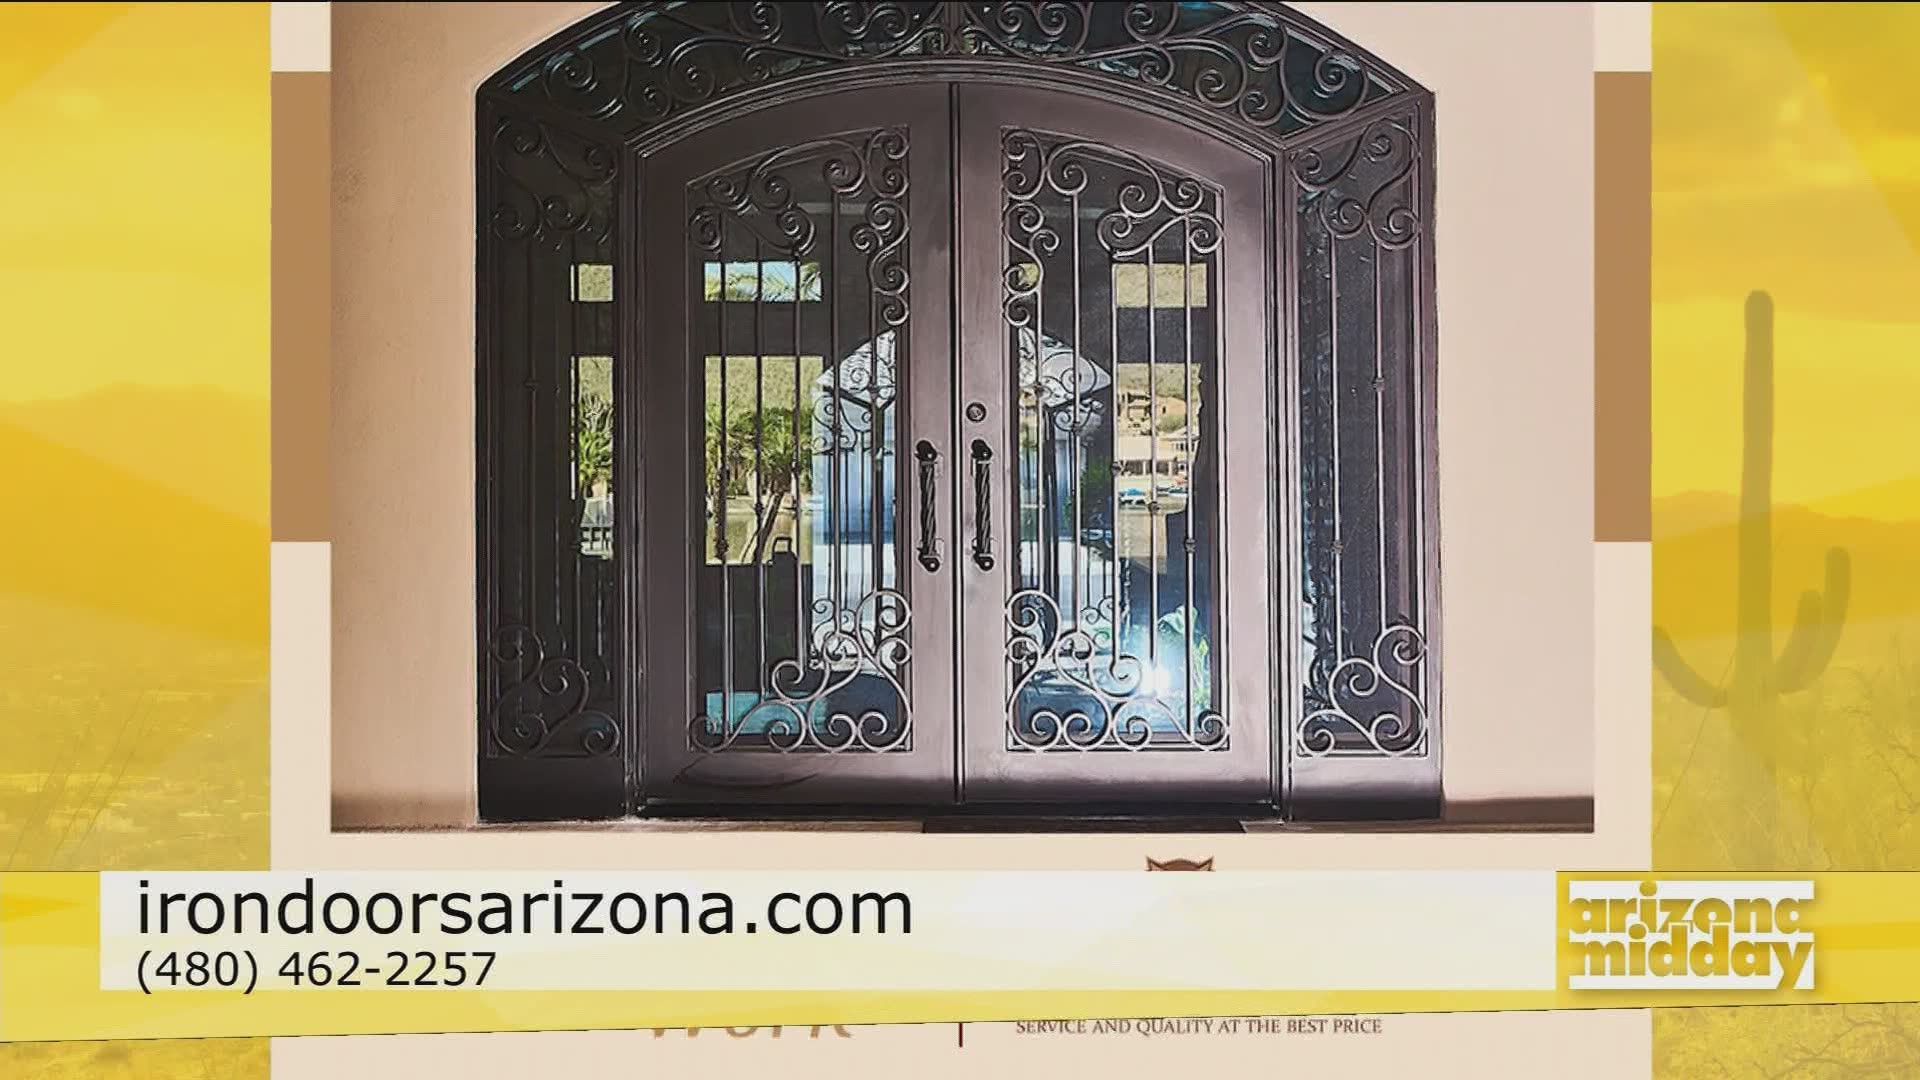 Steve Yagudayev with Iron Doors Arizona shows us some of the Iron Door Options to choose from & how it works to get one installed